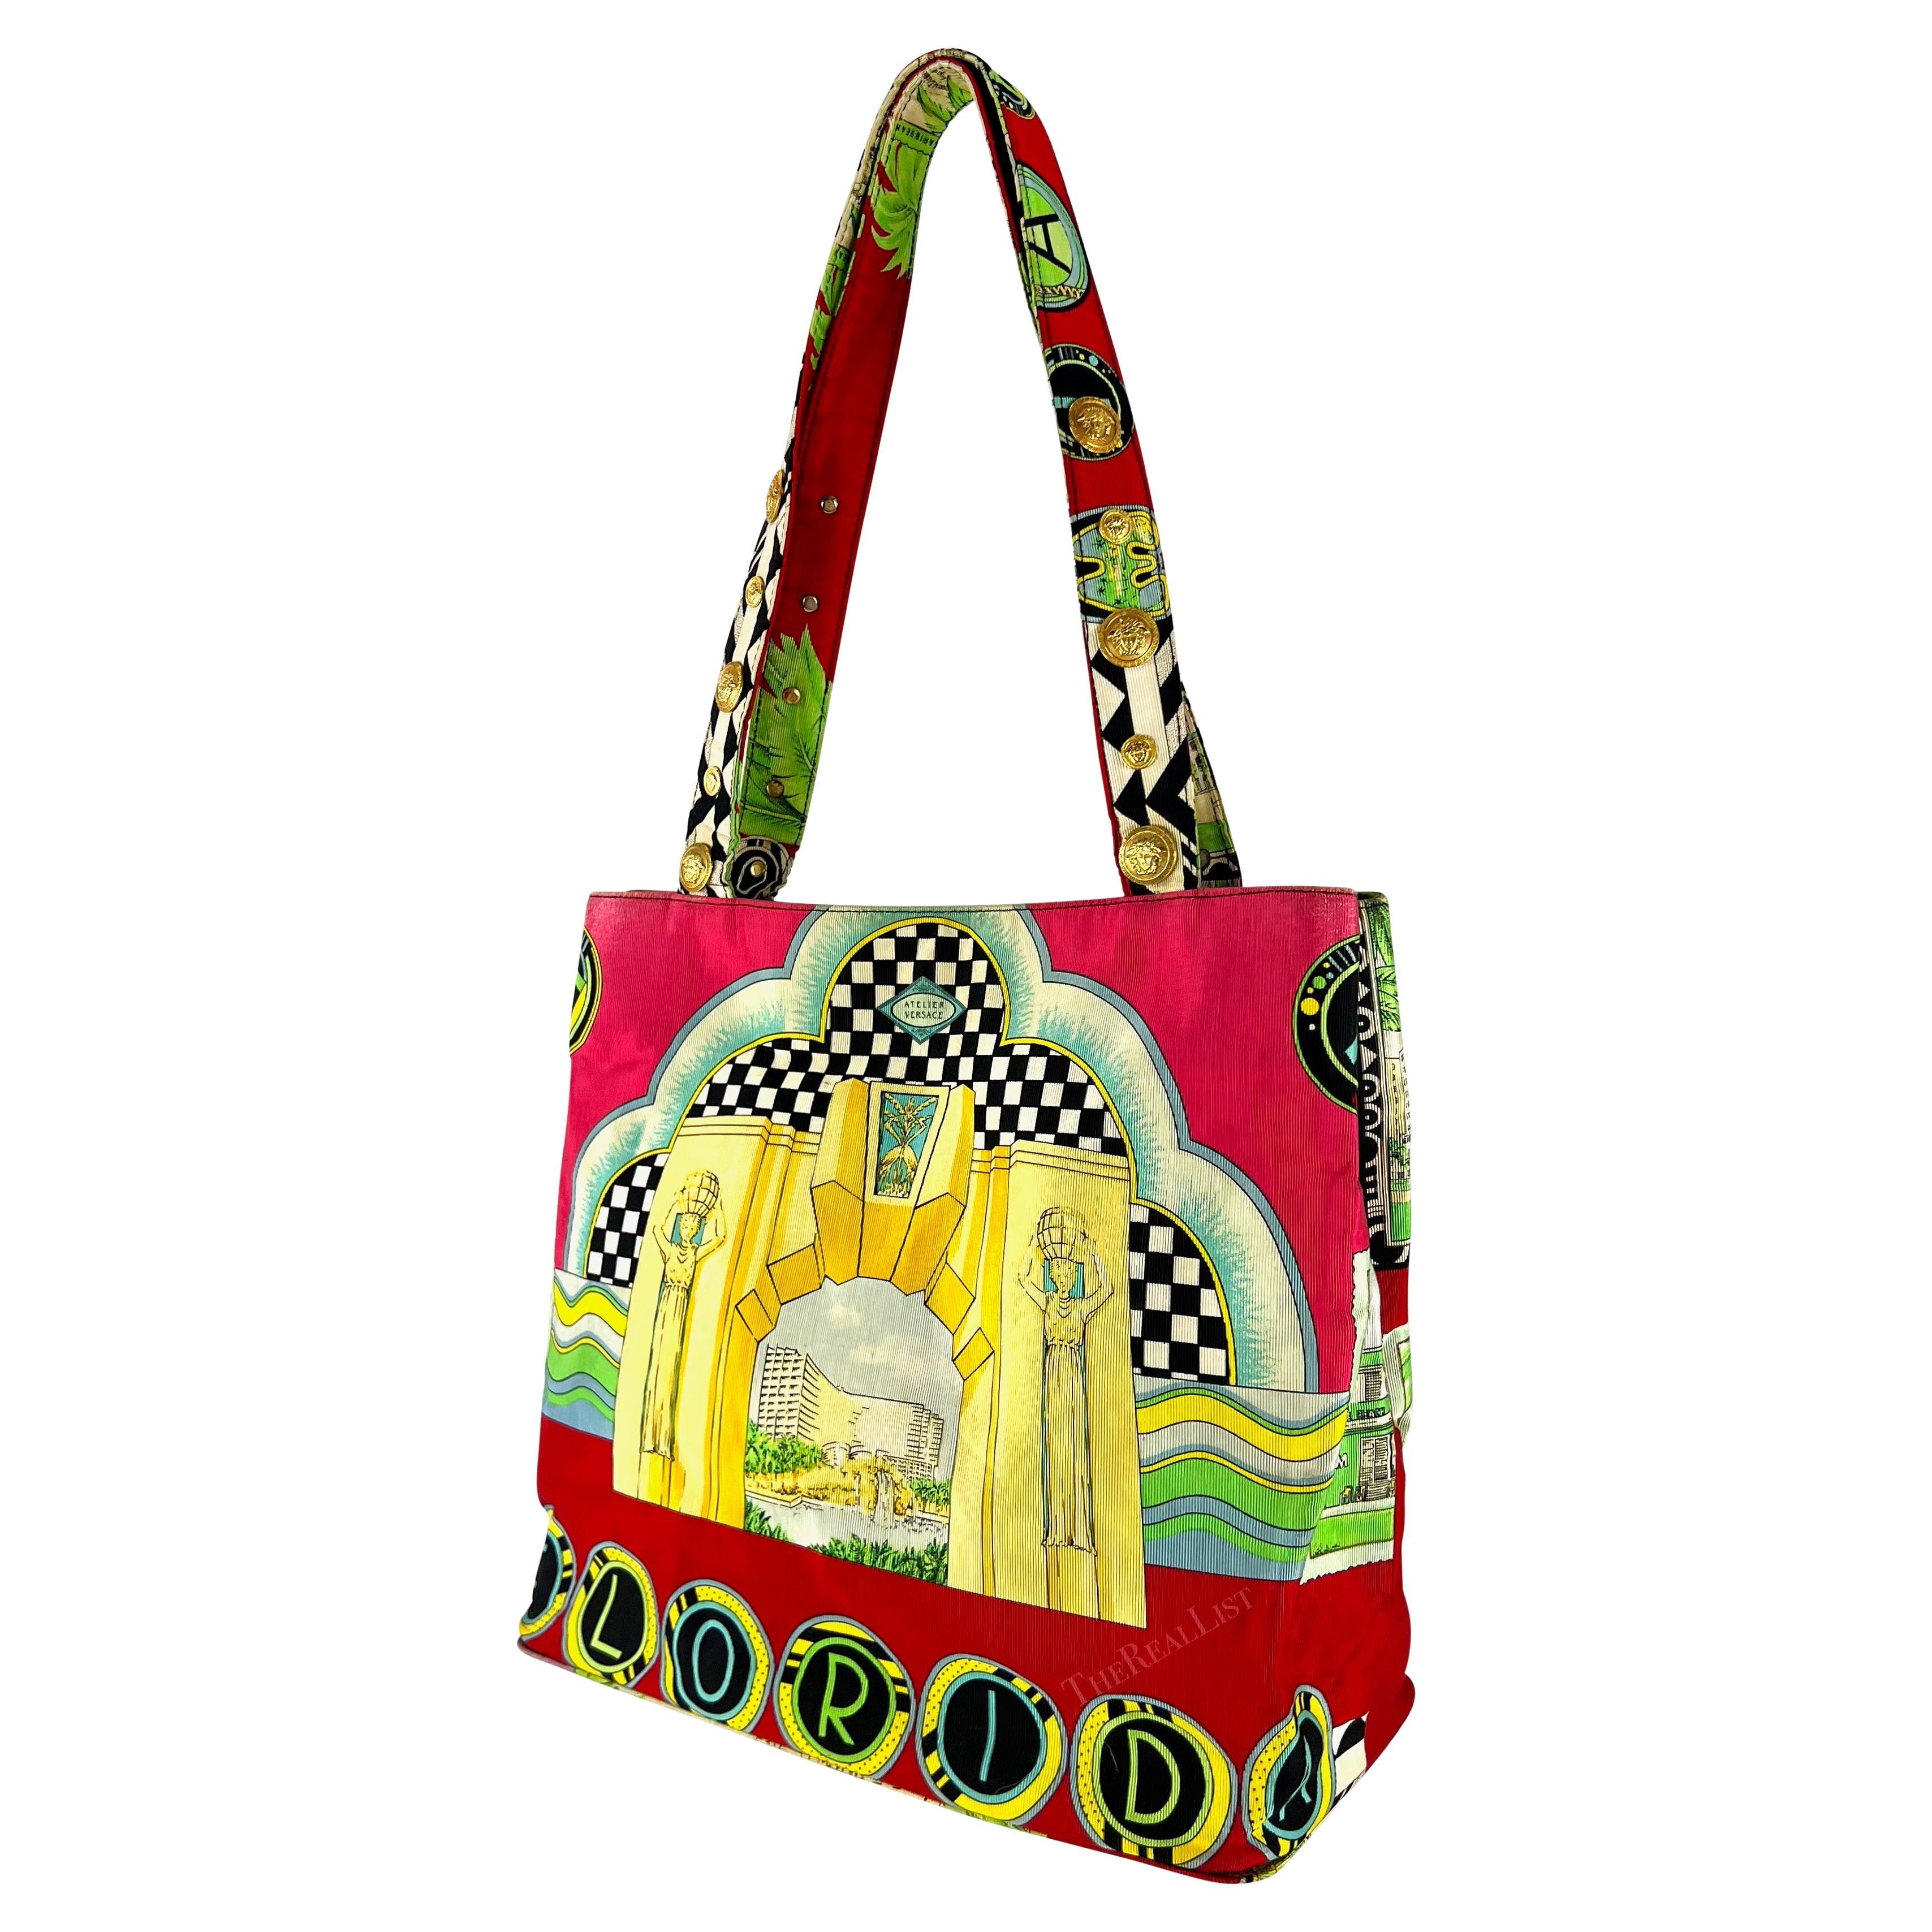 Presenting a fabulous red Miami print canvas tote by Gianni Versace, designed by Gianni Versace for the Spring/Summer 1993 collection. This tote showcases the brand’s iconic Miami motif print, featuring highlights of the city’s architecture. This